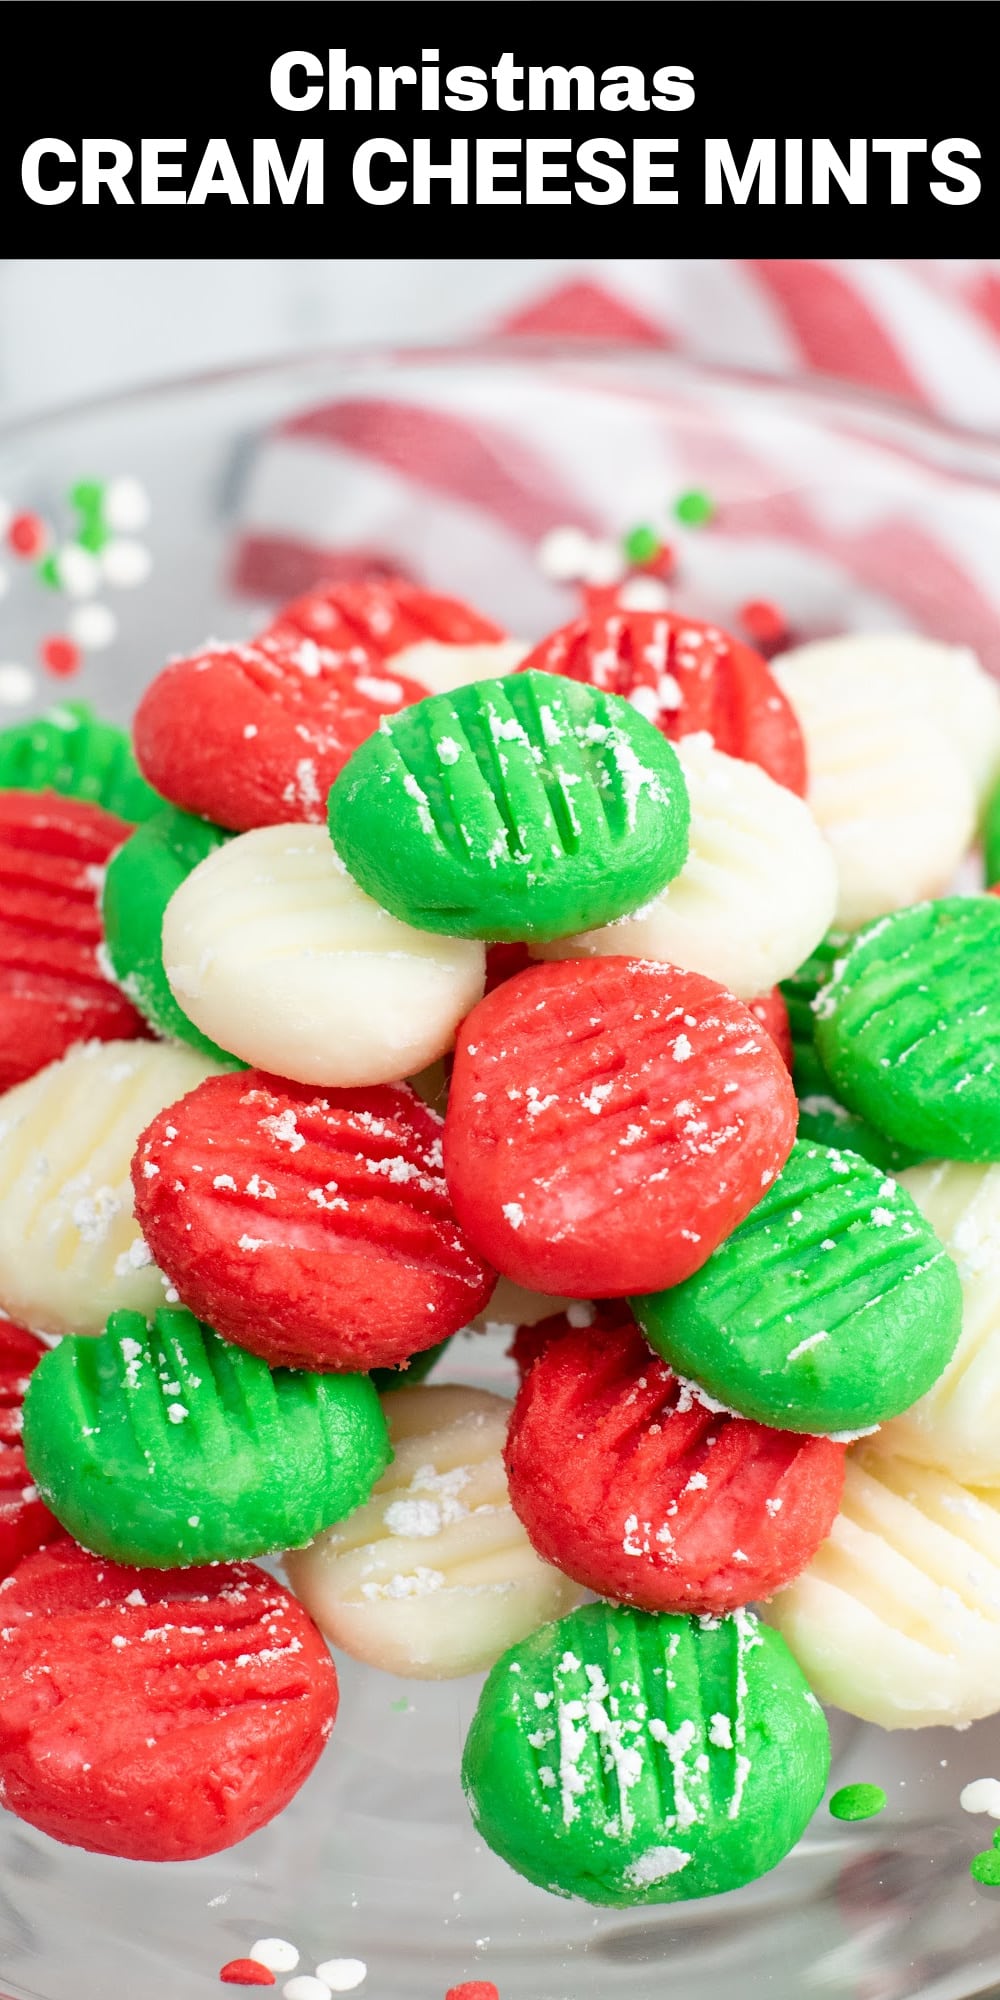 These festive Christmas Cream Cheese Mints make the perfect holiday sweet treat. Made with just a few simple ingredients, they’re creamy and melt-in-your mouth delicious, just as a homemade candy should be.